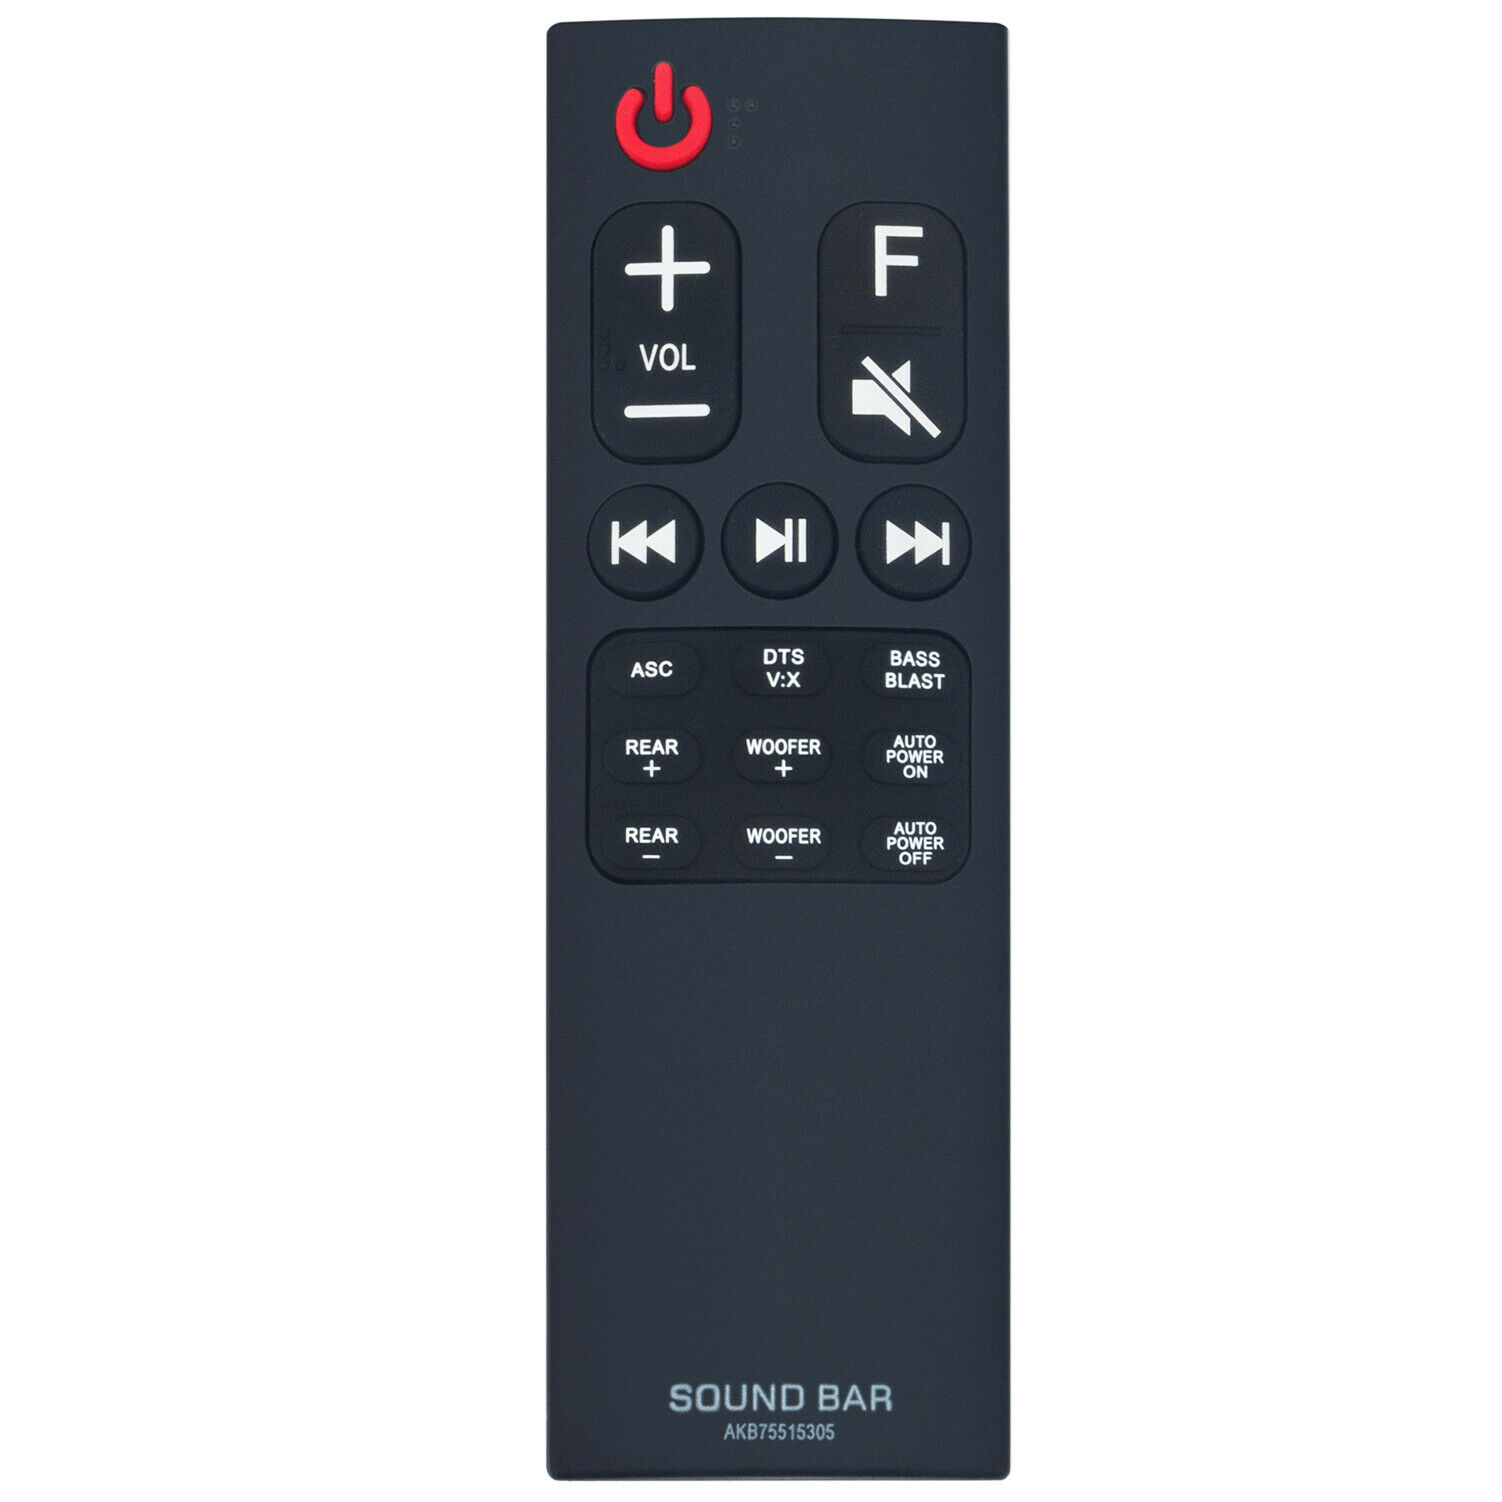 WINFLIKE Replaced Remote Control AKB75515305 Fit for LG 2.1 Channel Audio Sound Bar SK5 - image 1 of 1